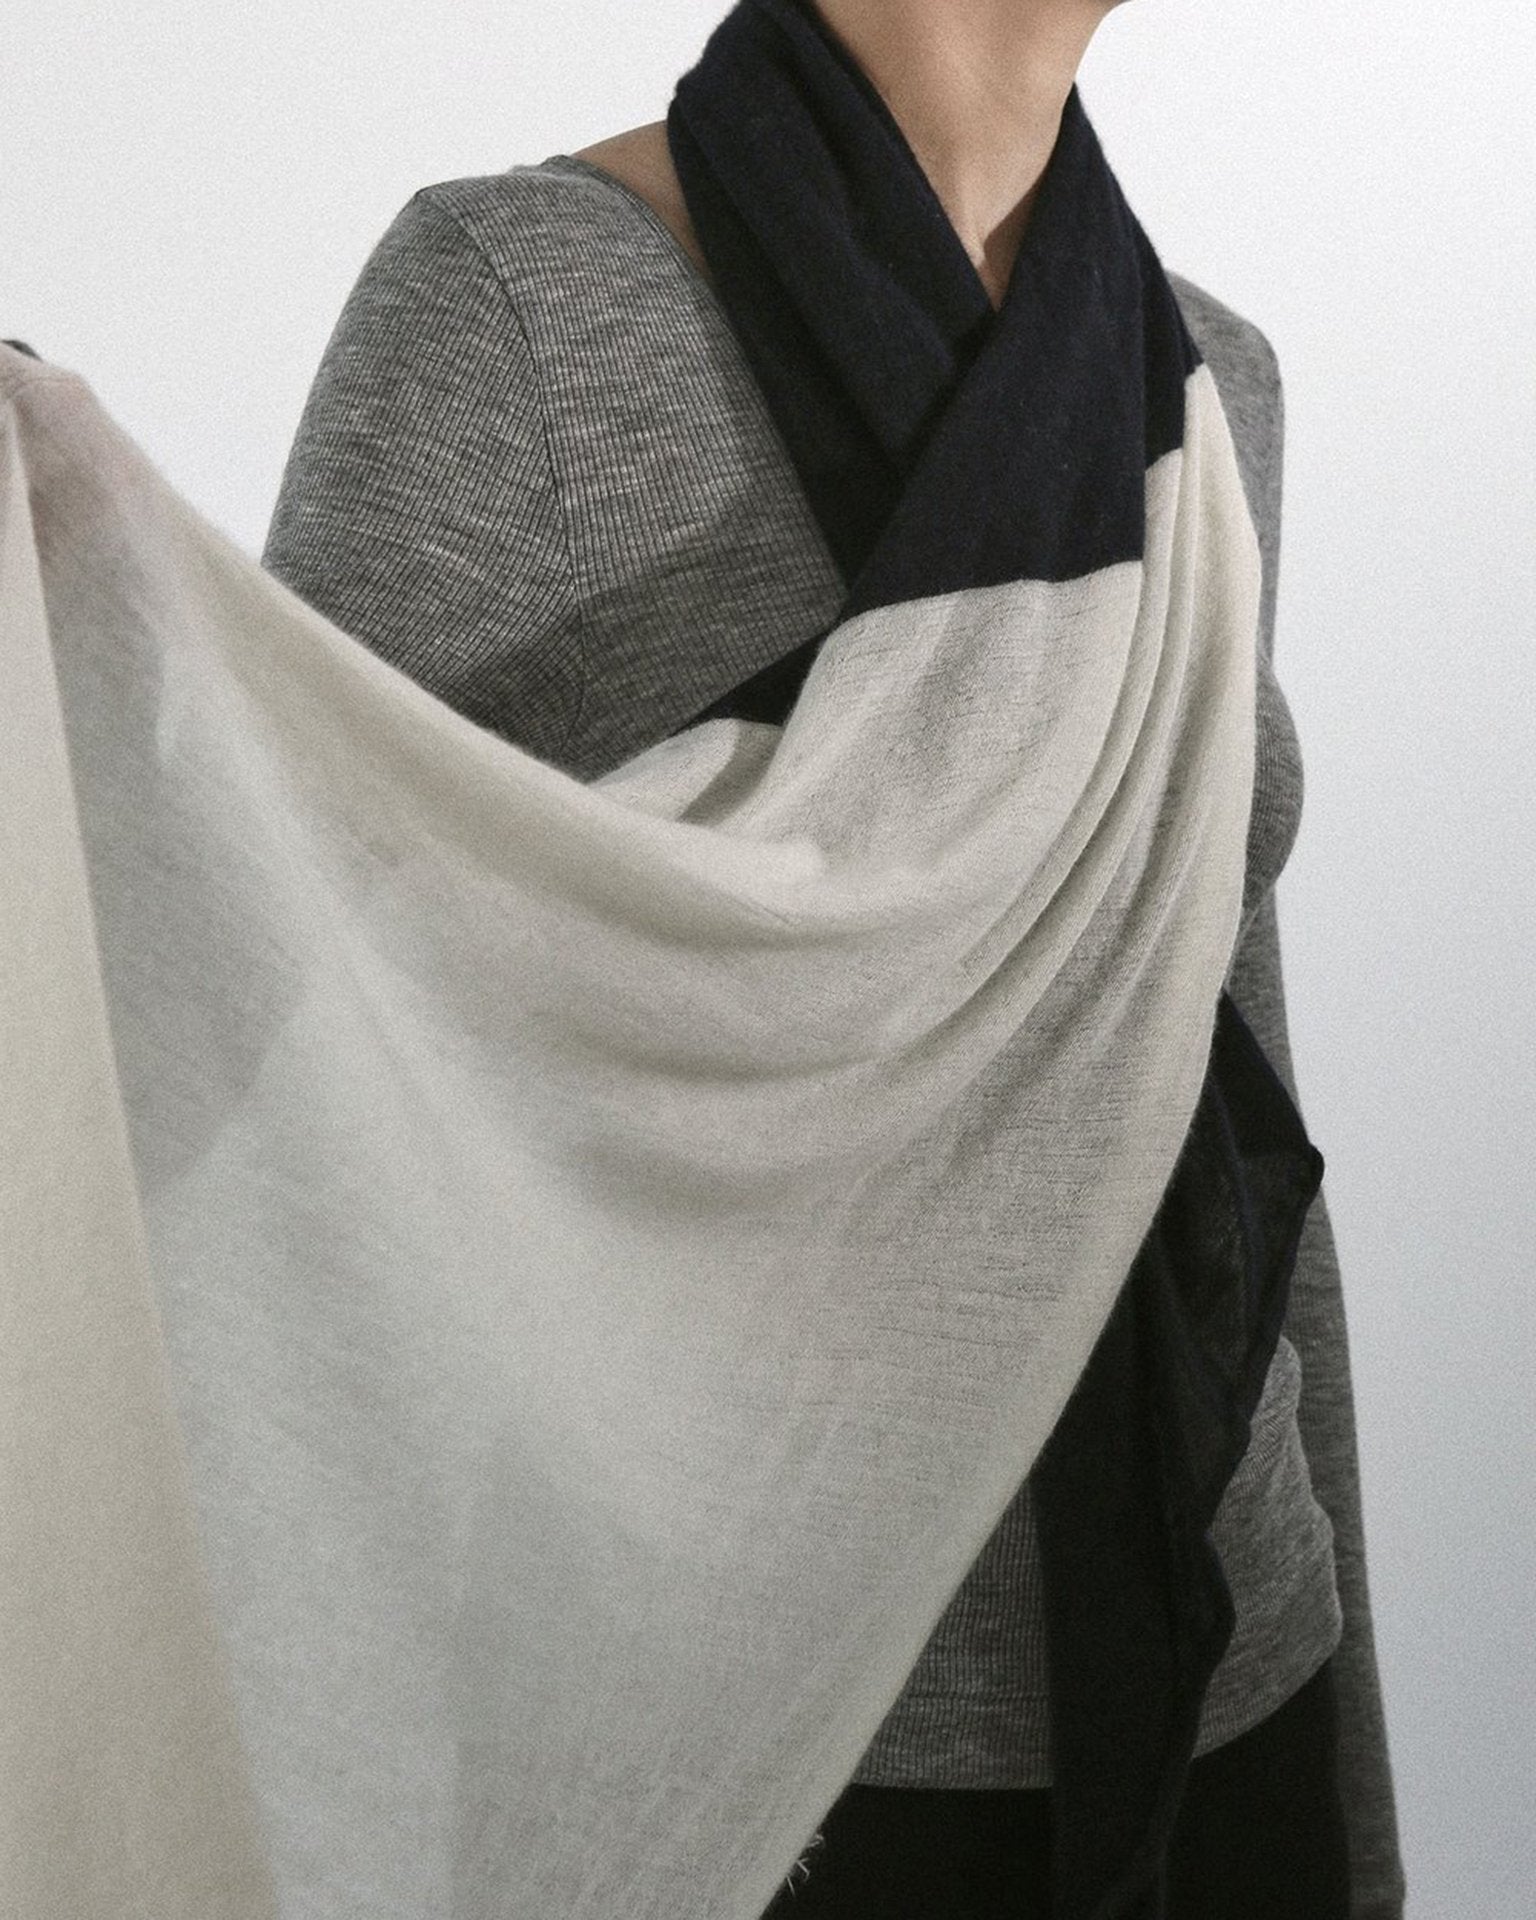 Grisal Love Bliss Black - & Cashmere Duo Boutiques Scarf in Milk